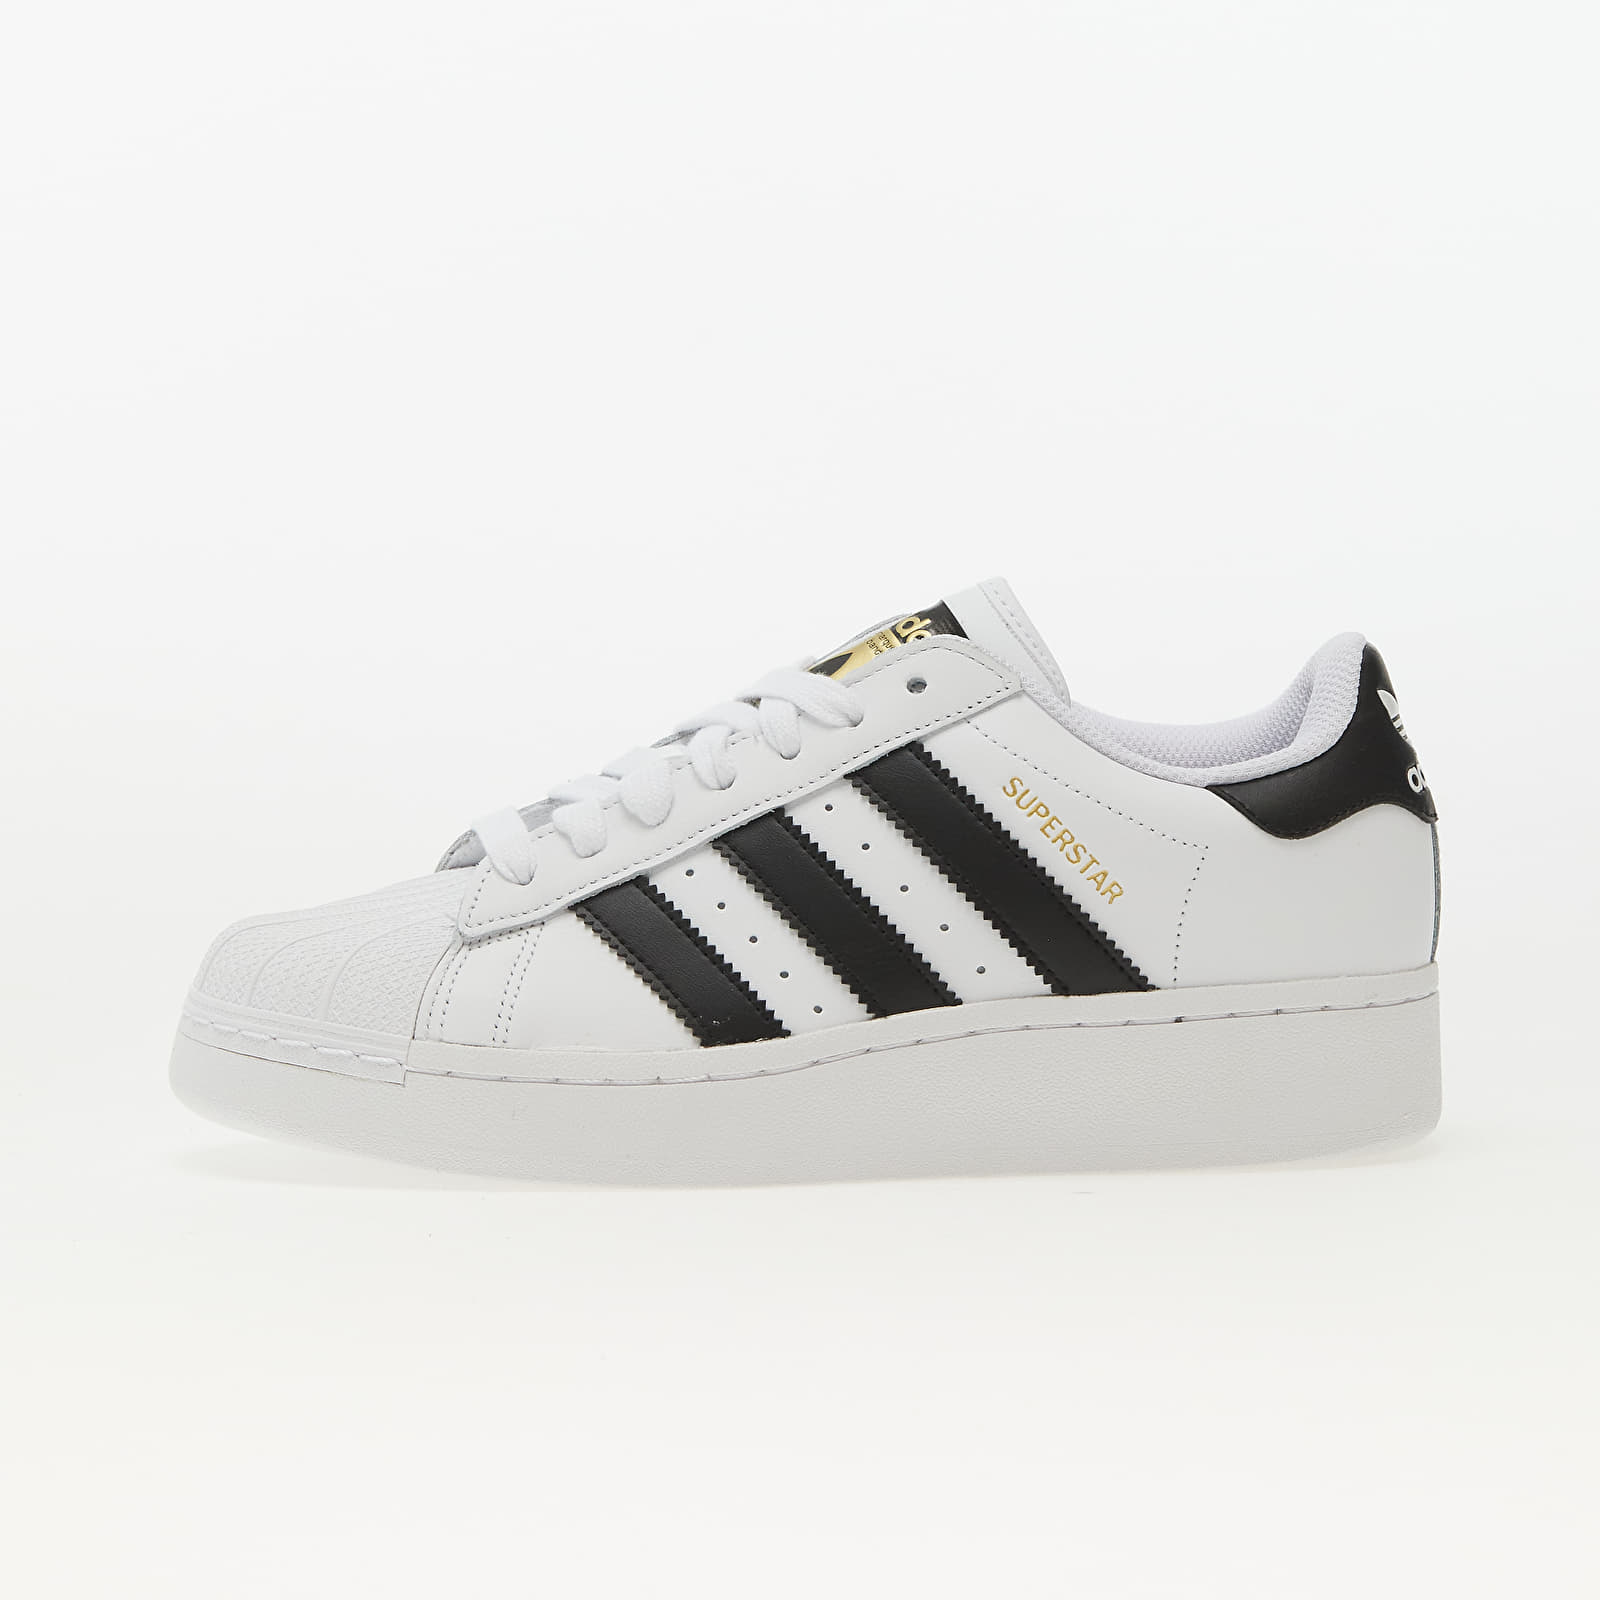 Chaussures et baskets homme adidas Superstar XLG Ftw White/ Core Black/ Gold Metalic